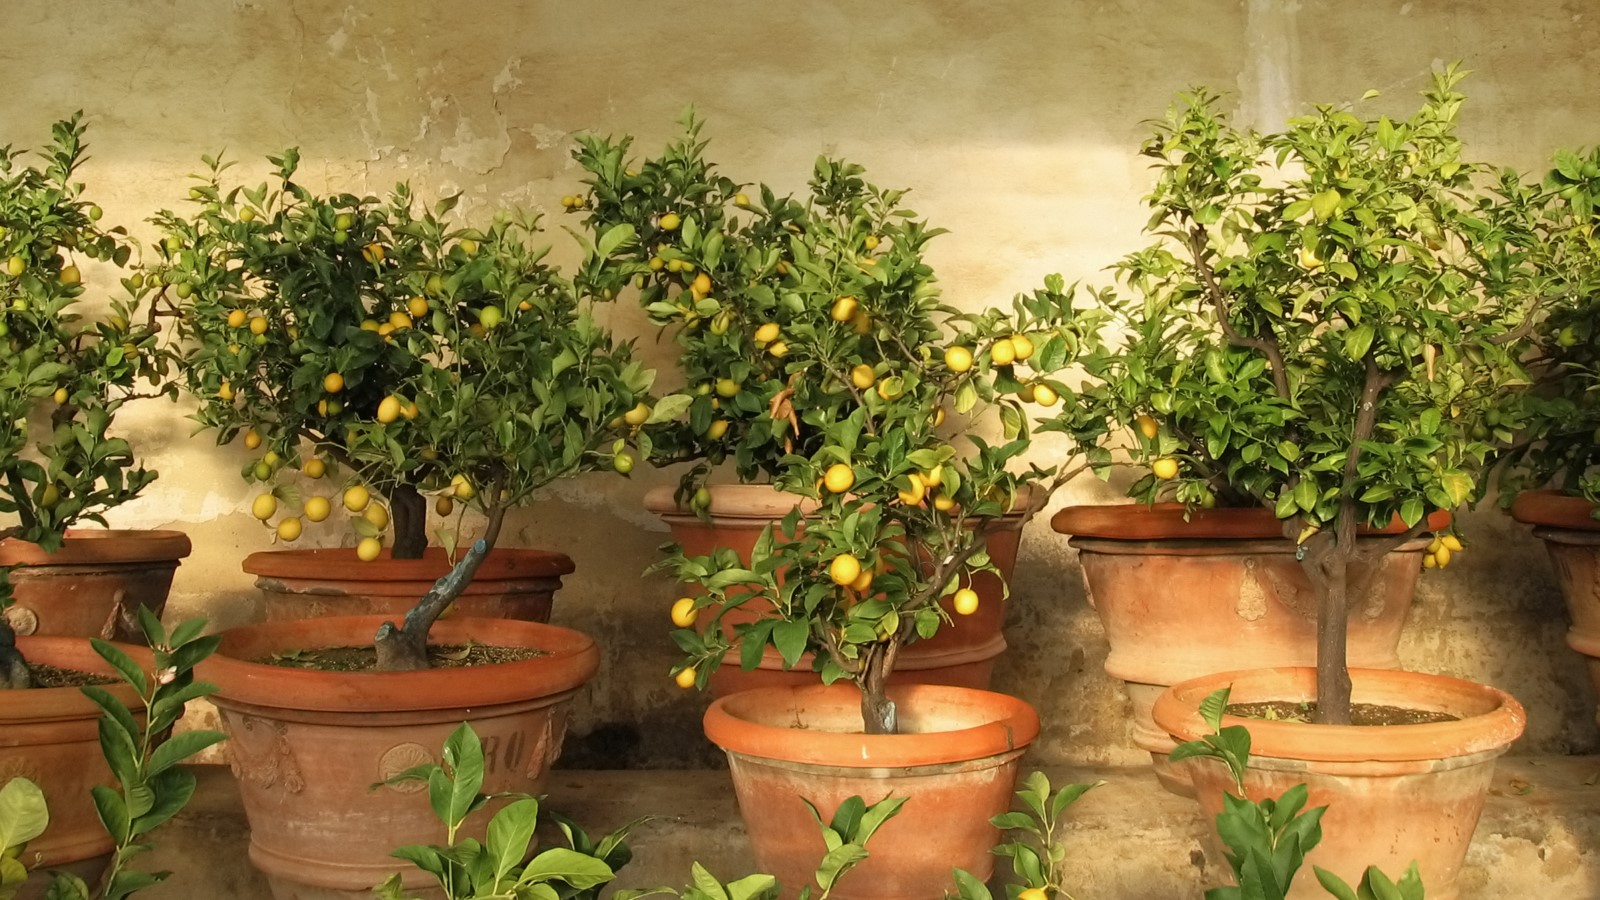 Best fruit trees to grow in pots: 9 options for containers